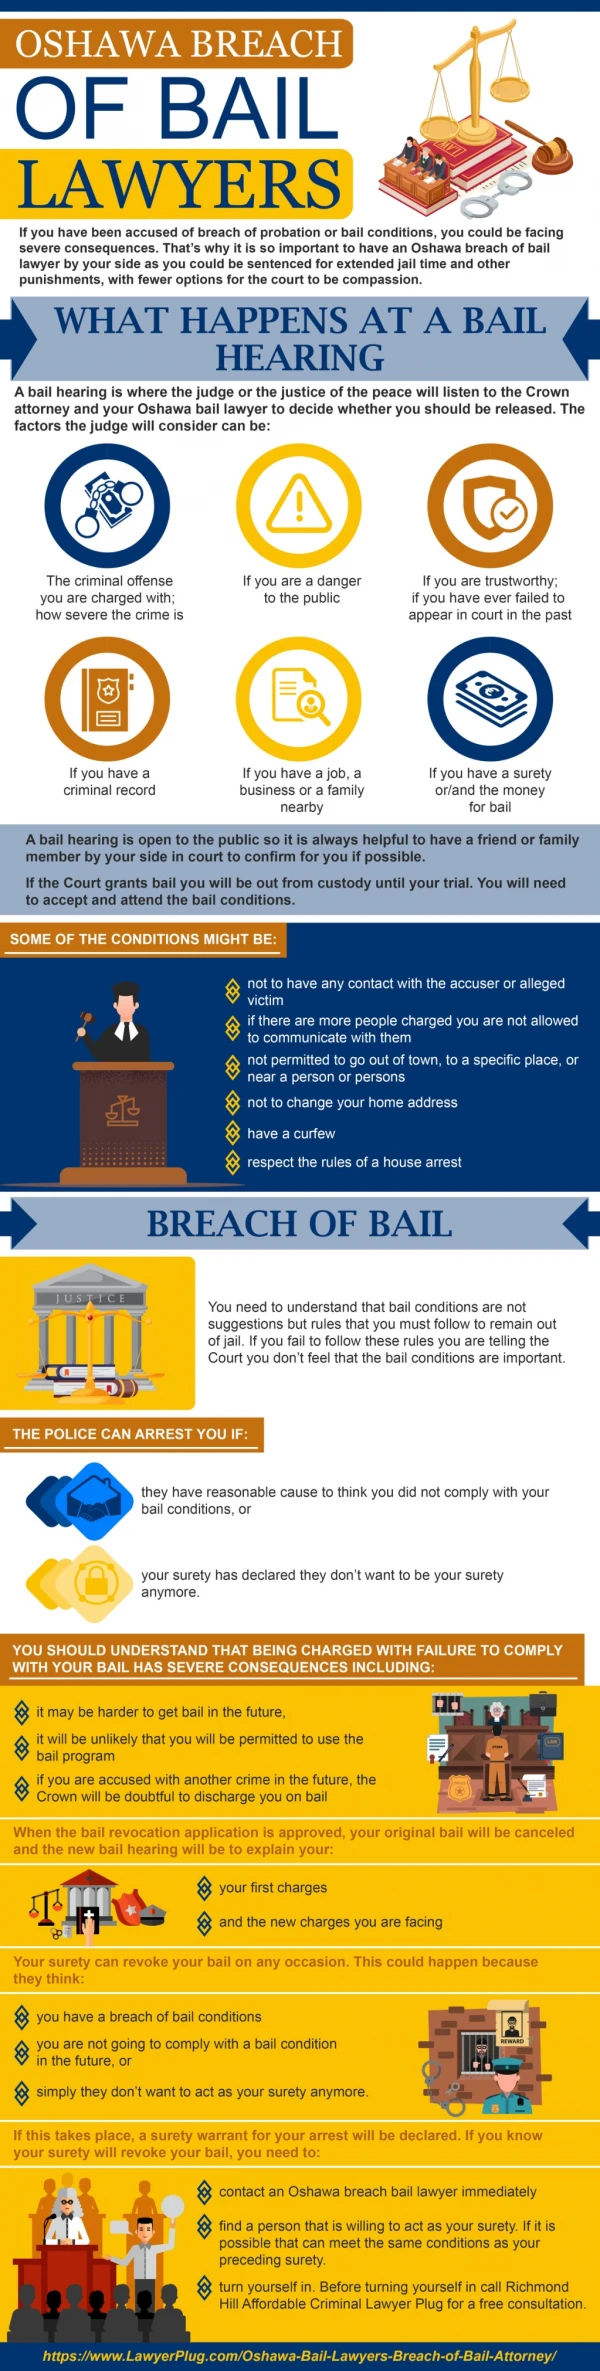 How to Get Released on Bail Lawyer Advice Tips & Advice in Oshawa, Whitby and all over Durham Region – Free 24/7 Bail La